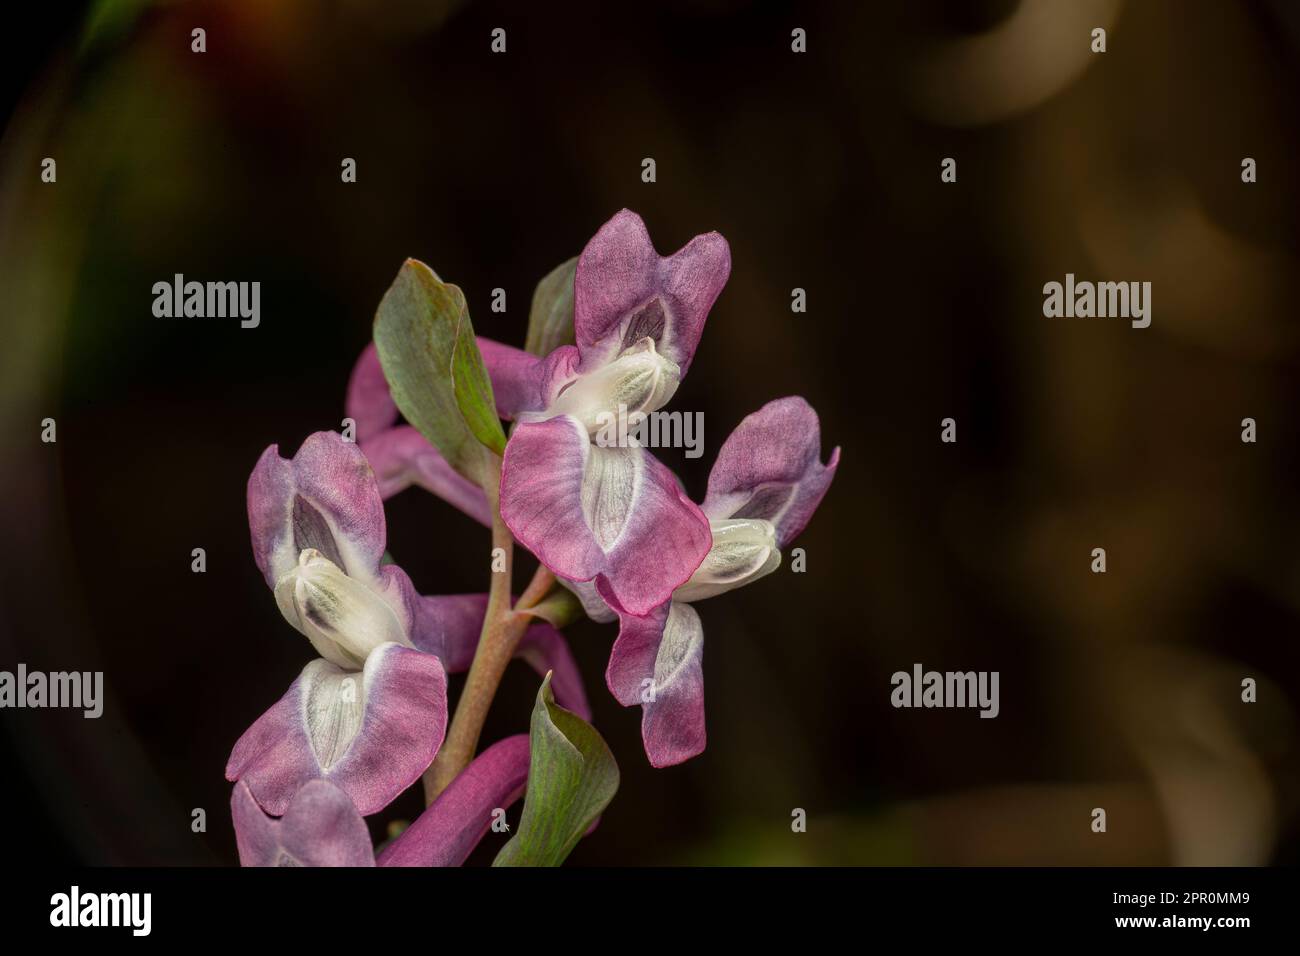 Corydalis, fumewort or bird-in-a-bush blossoms in detail Stock Photo